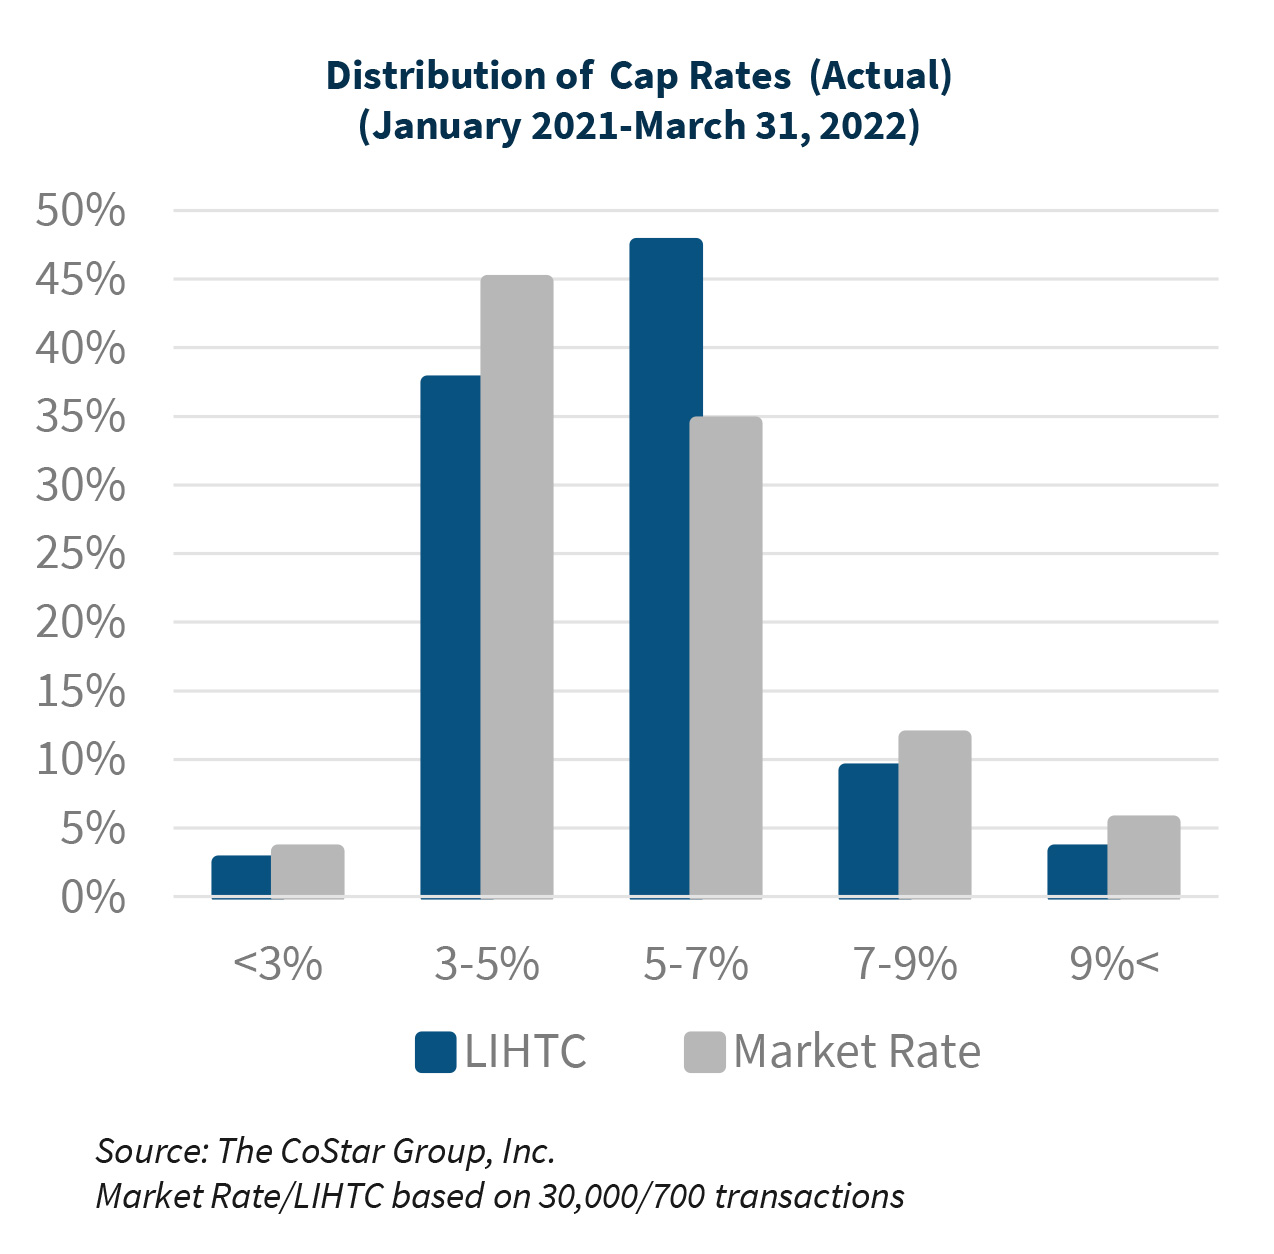 Distribution of Cap Rates (Actual) (January 2021-March 31, 2022)